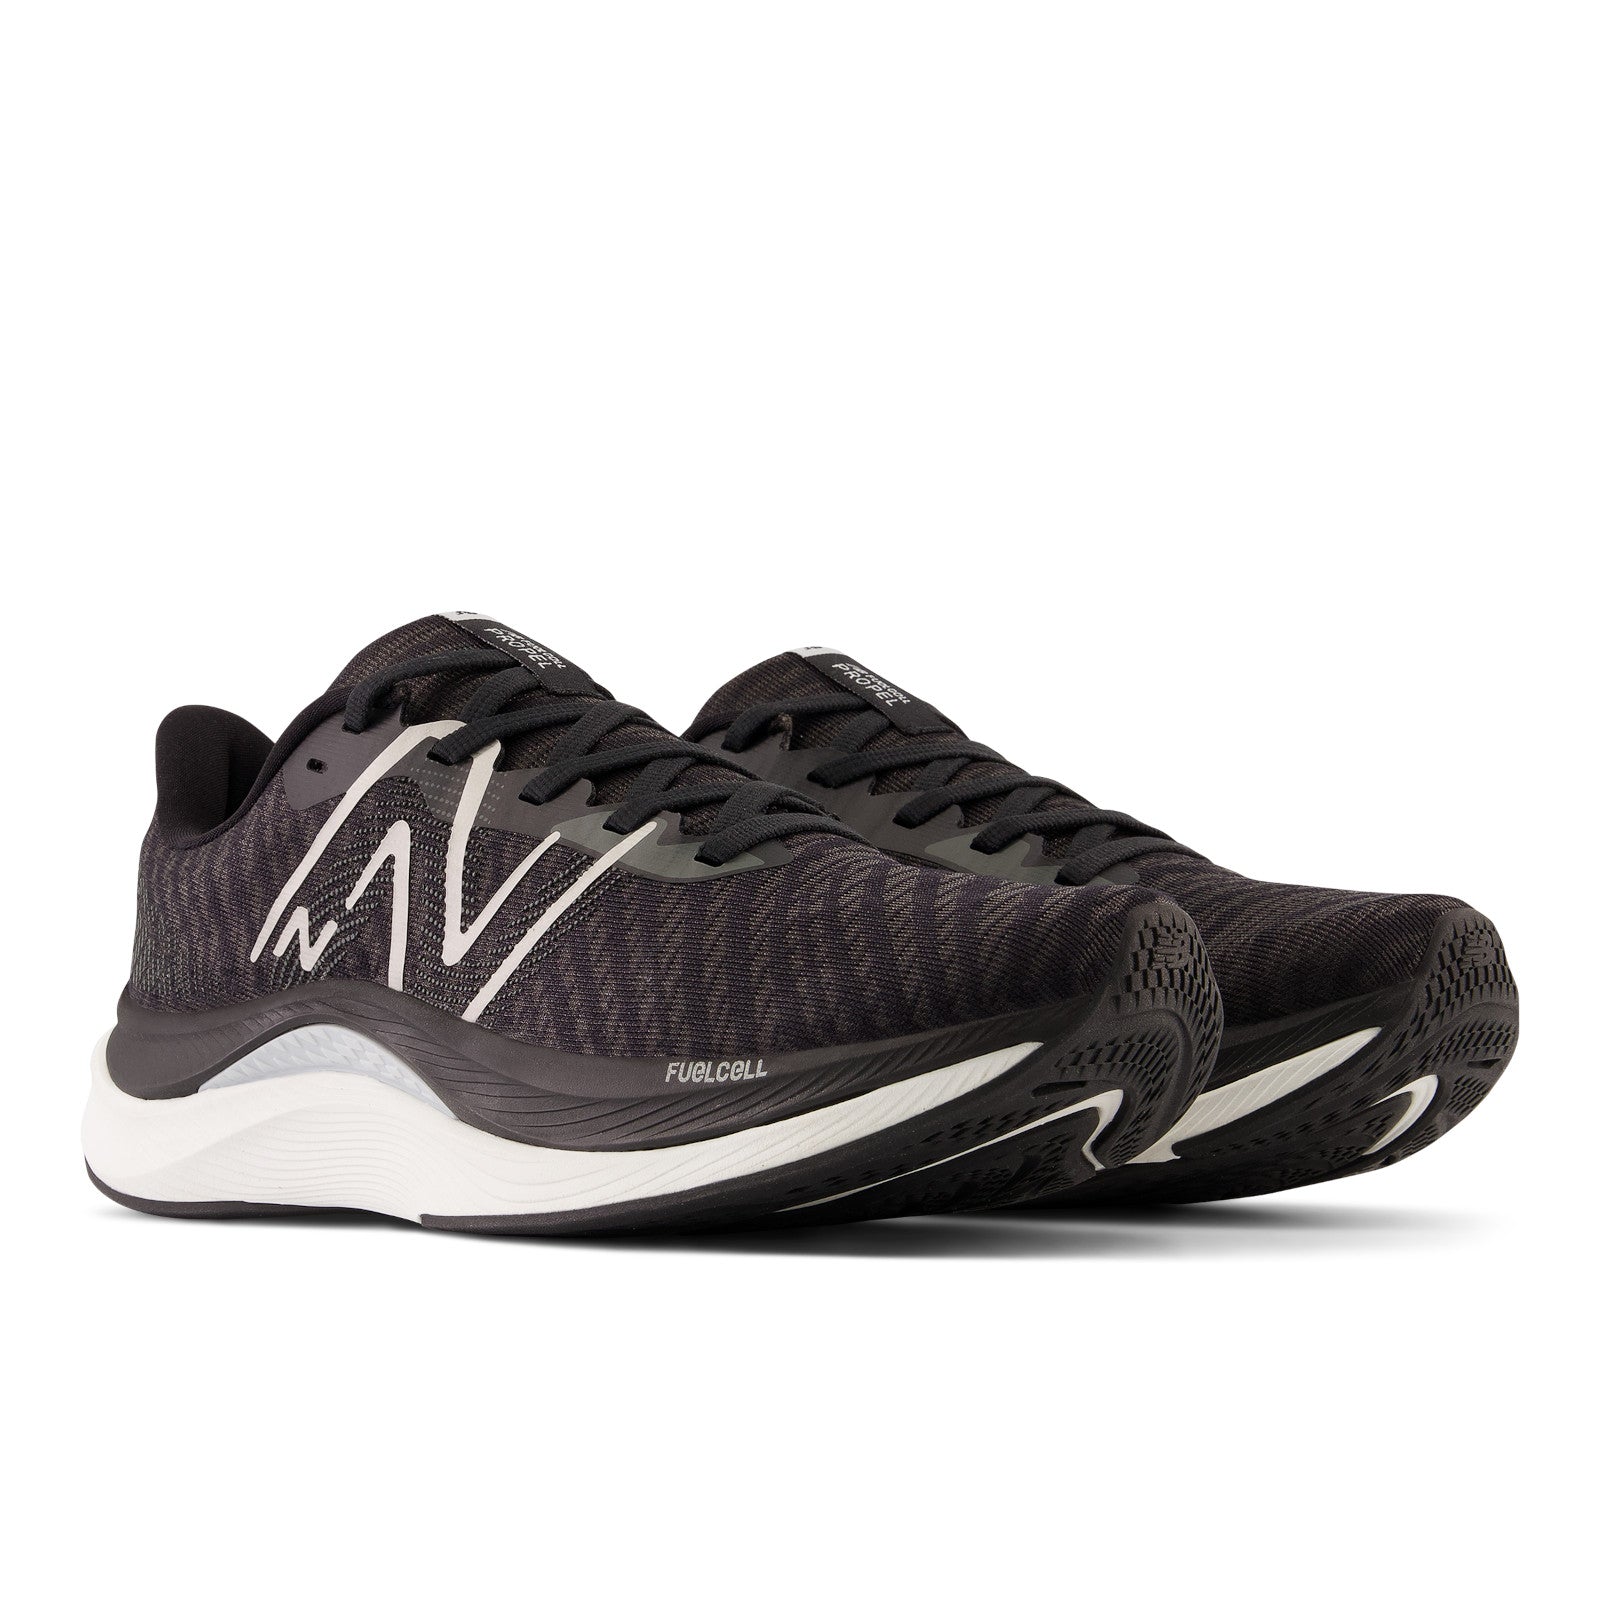 New Balance Women's Propel Fuelcell Black  Running Shoes